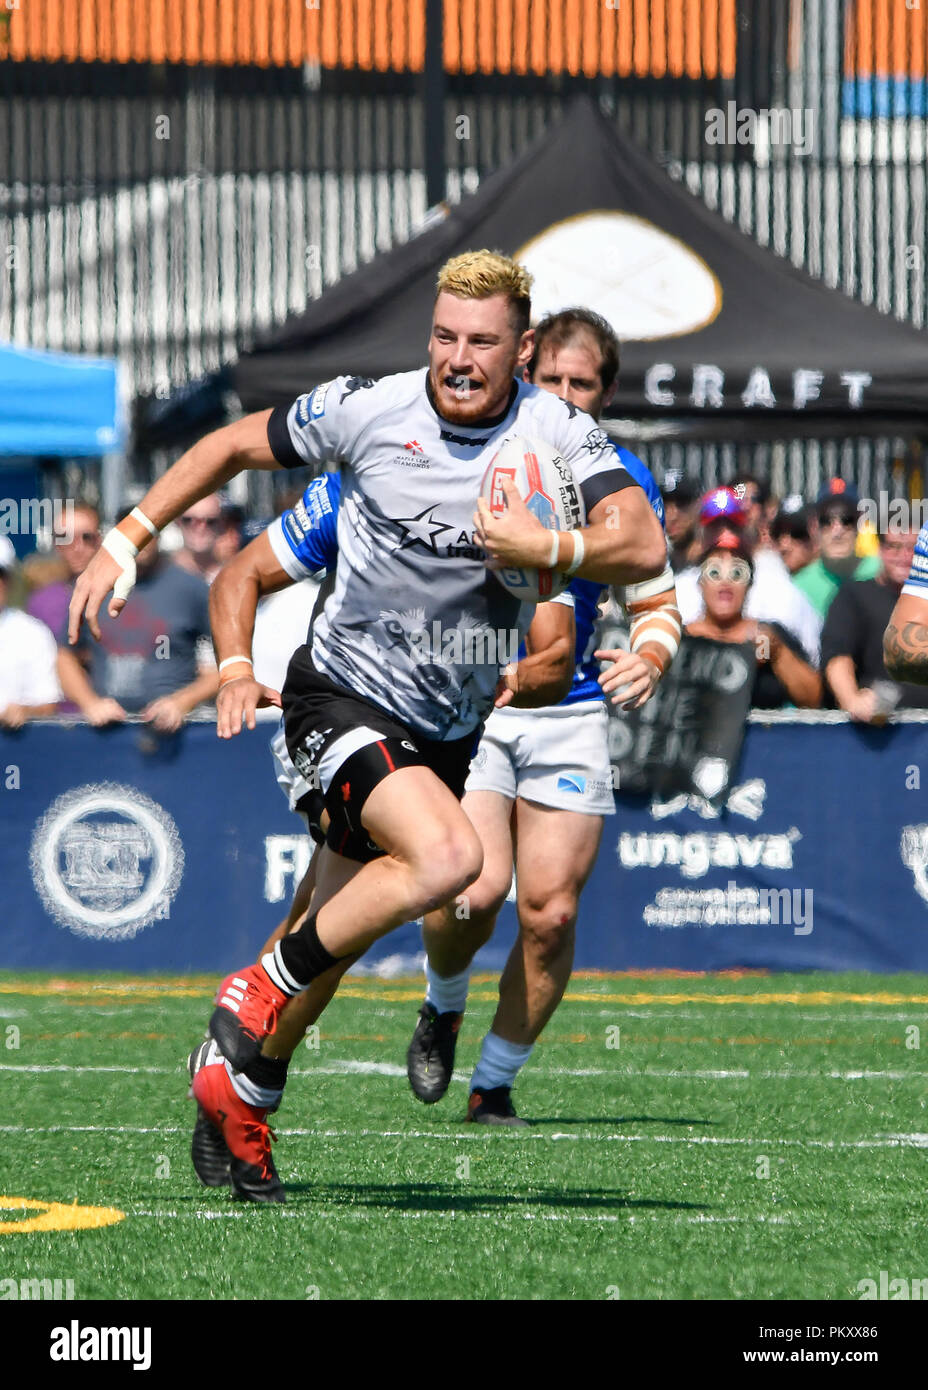 Lamport Stadium, Toronto, Ontario, Canada, 15th September 2018.   Blake Wallace of Toronto Wolfpack on the attack against Toulouse Olympique during Toronto Wolfpack v Toulouse Olympique in the Super 8's The Qualifiers.   Credit: Touchlinepics/Alamy Live News Stock Photo